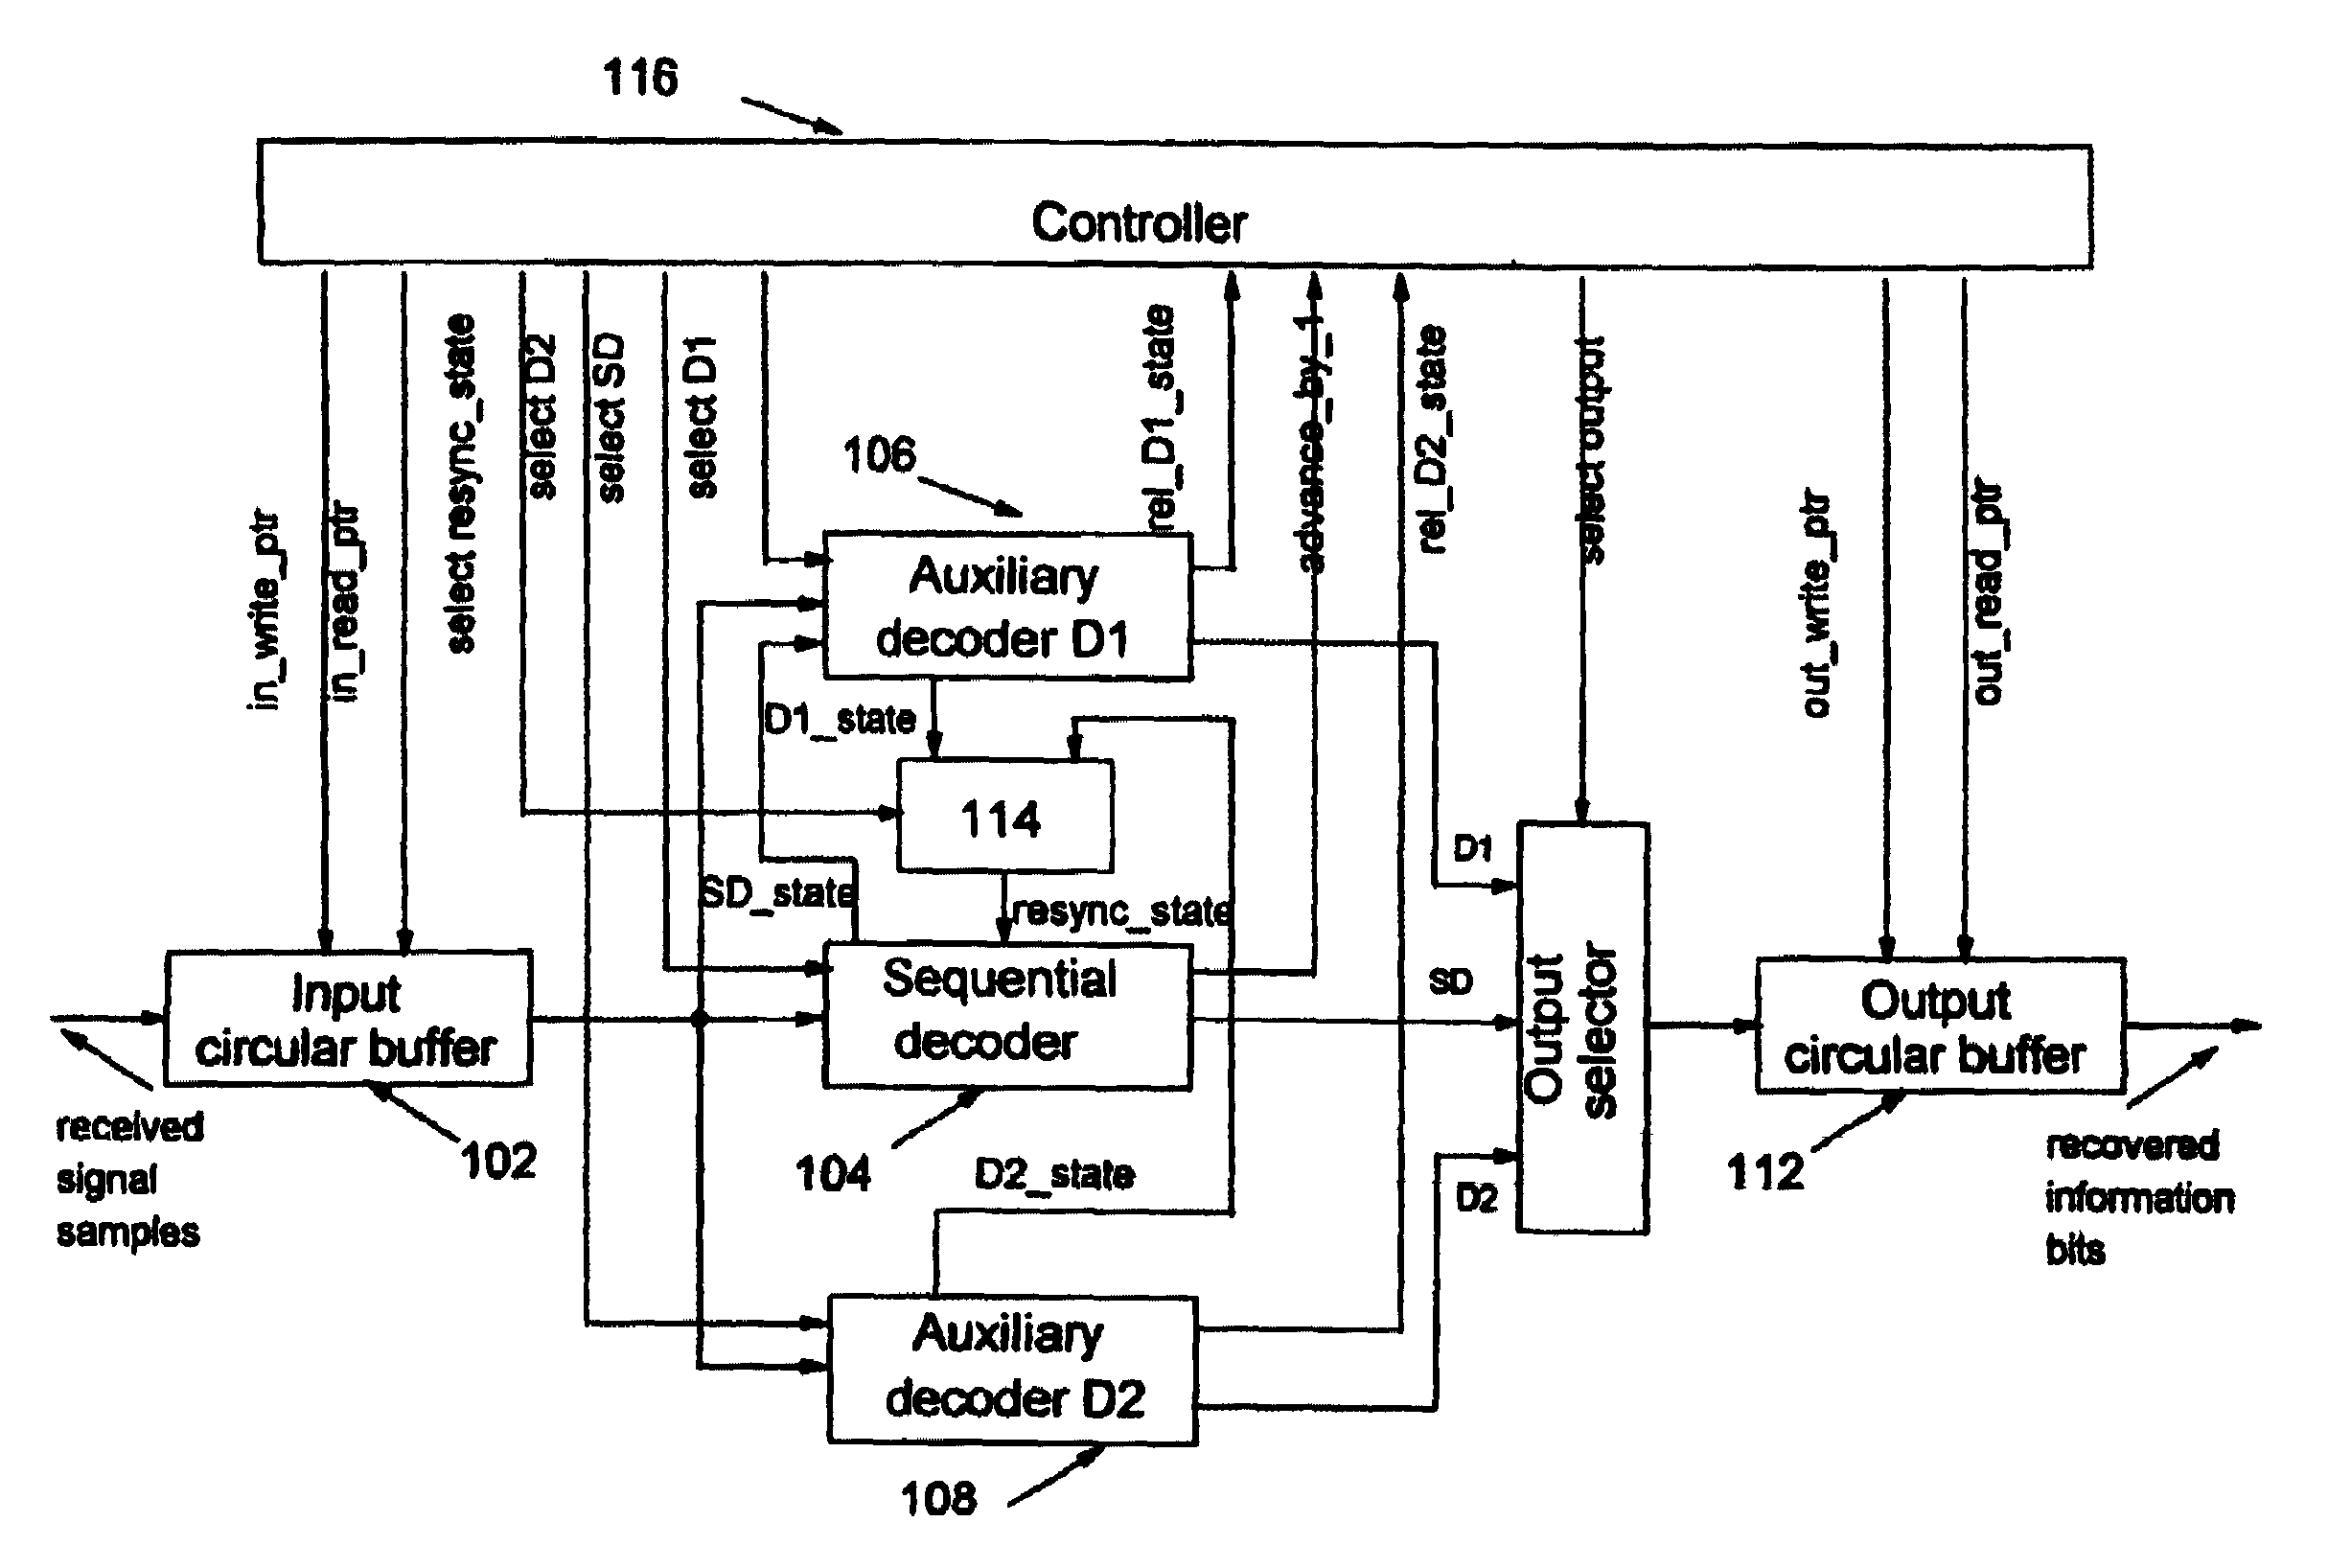 Method and apparatus for reliable resynchronization of sequential decoders